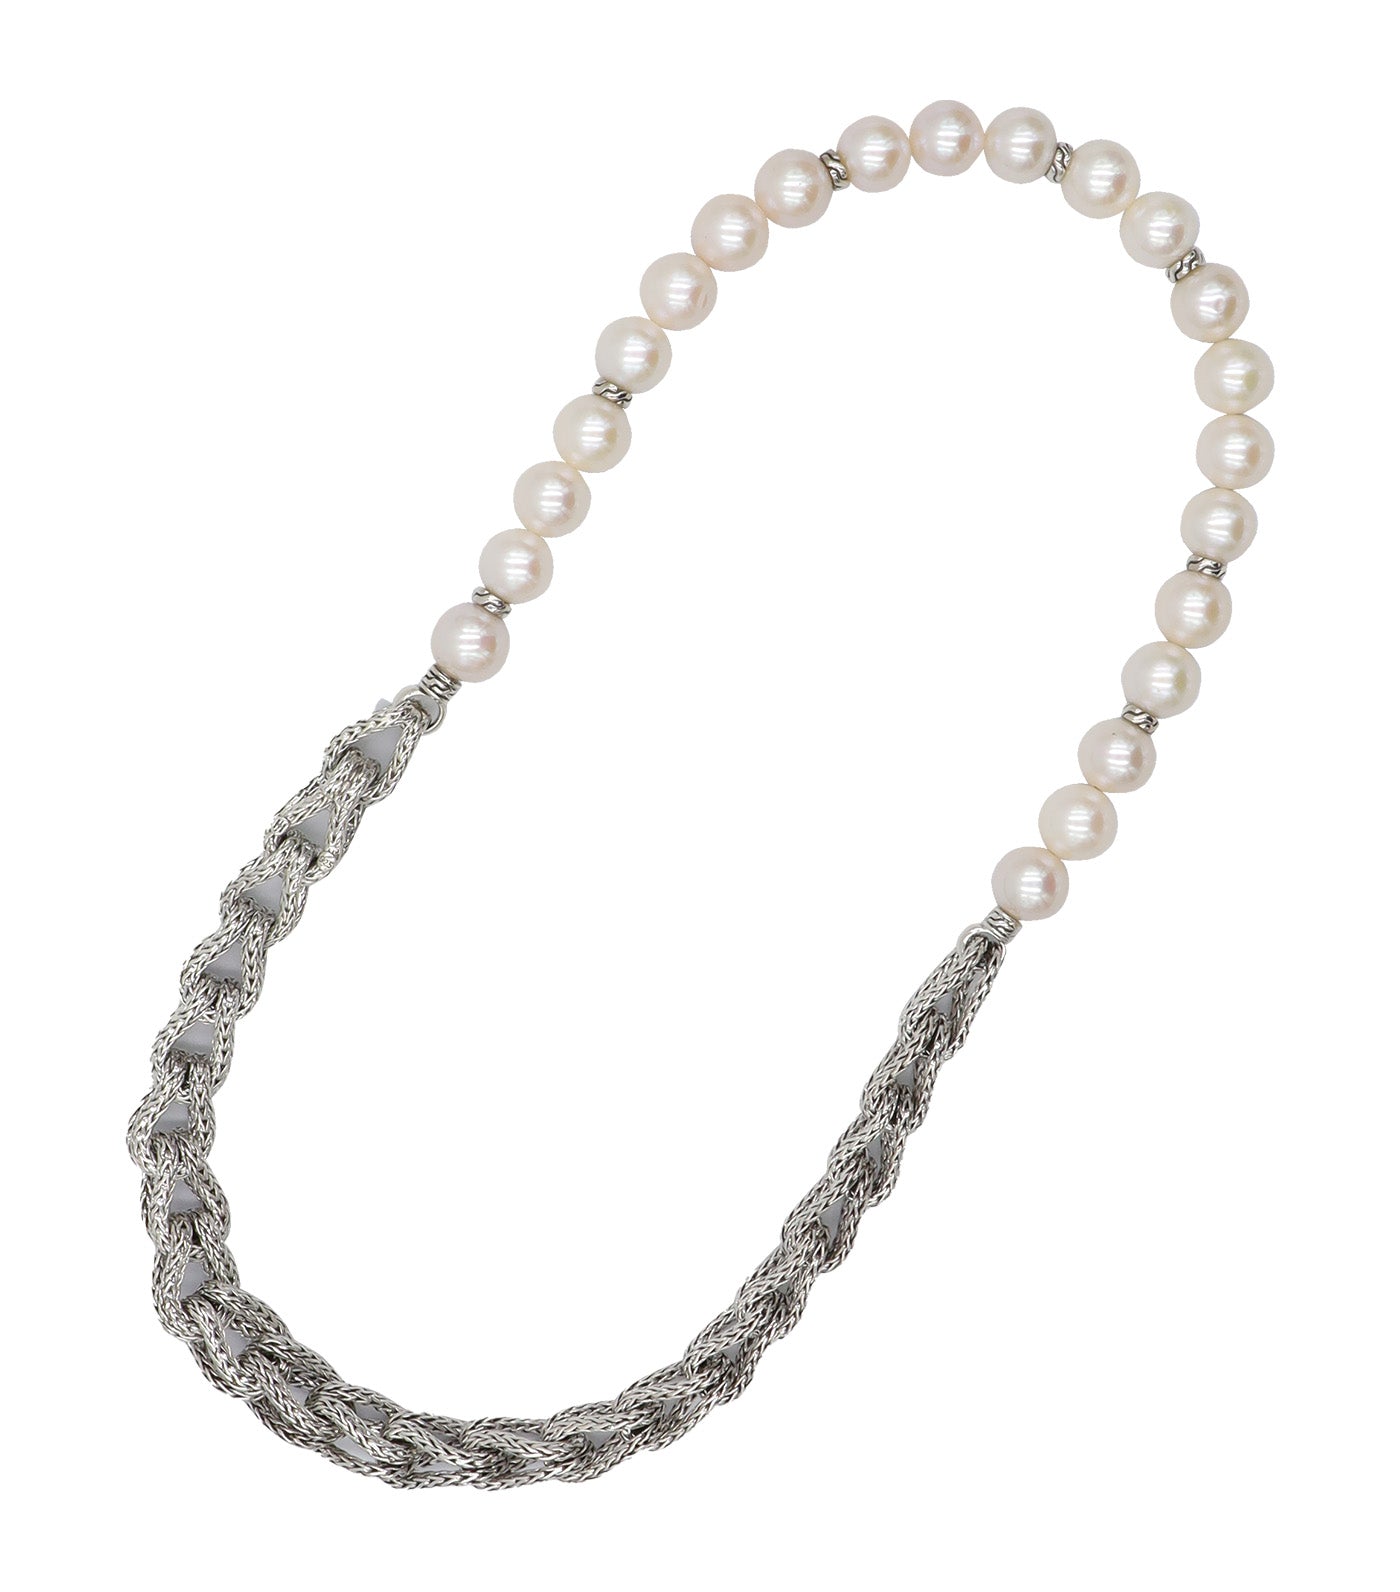 Asli Classic Chain Link Silver Necklace with Cultured Fresh Water Pearl